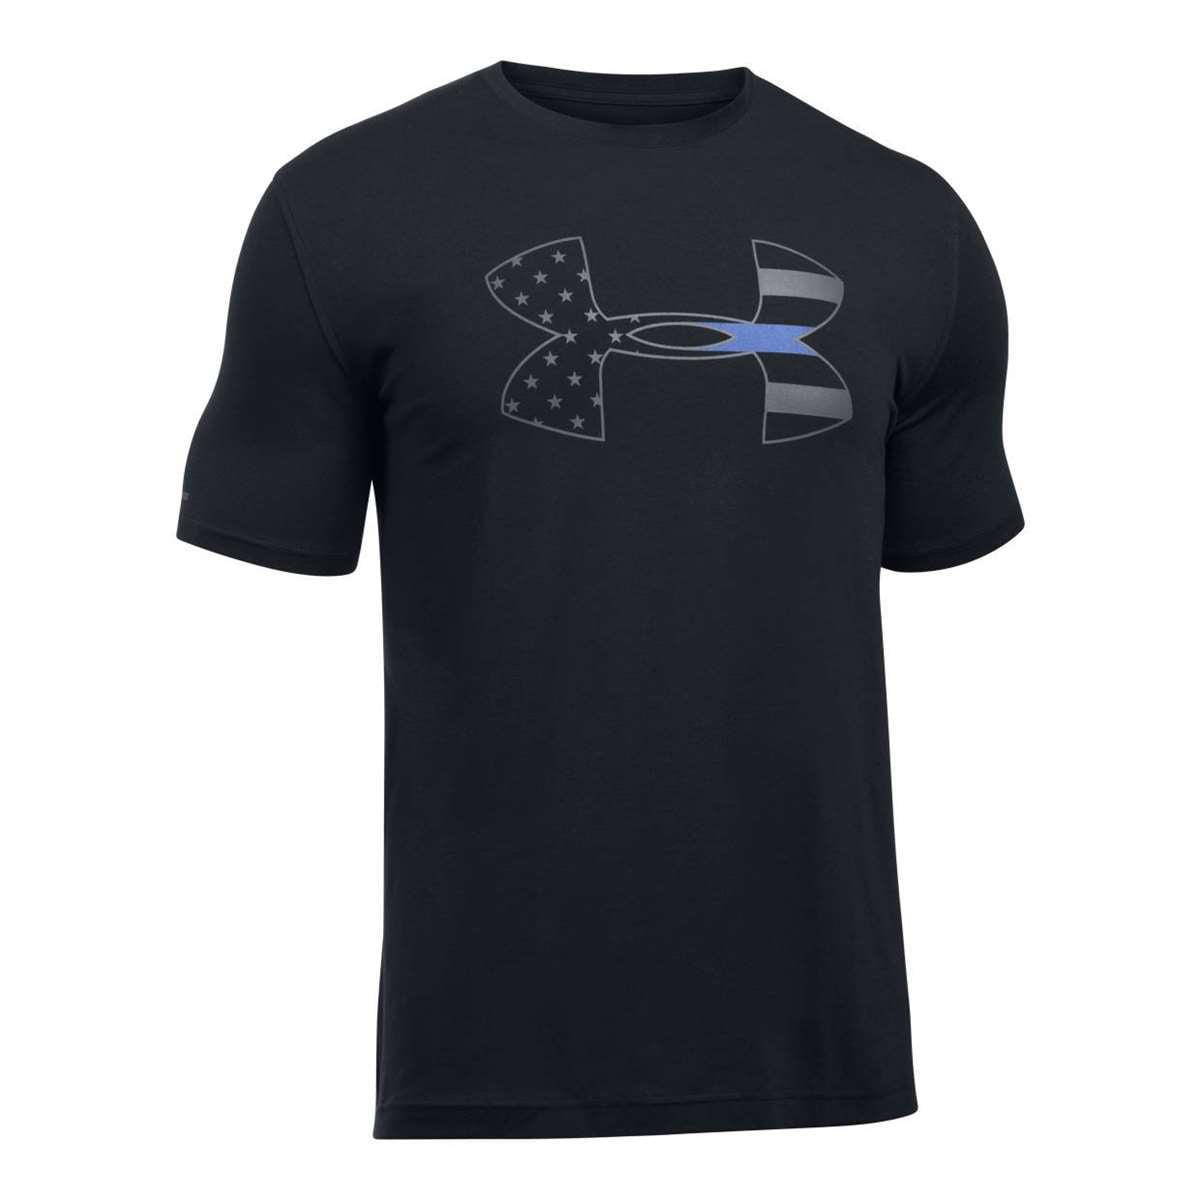 thin blue line shirts under armour